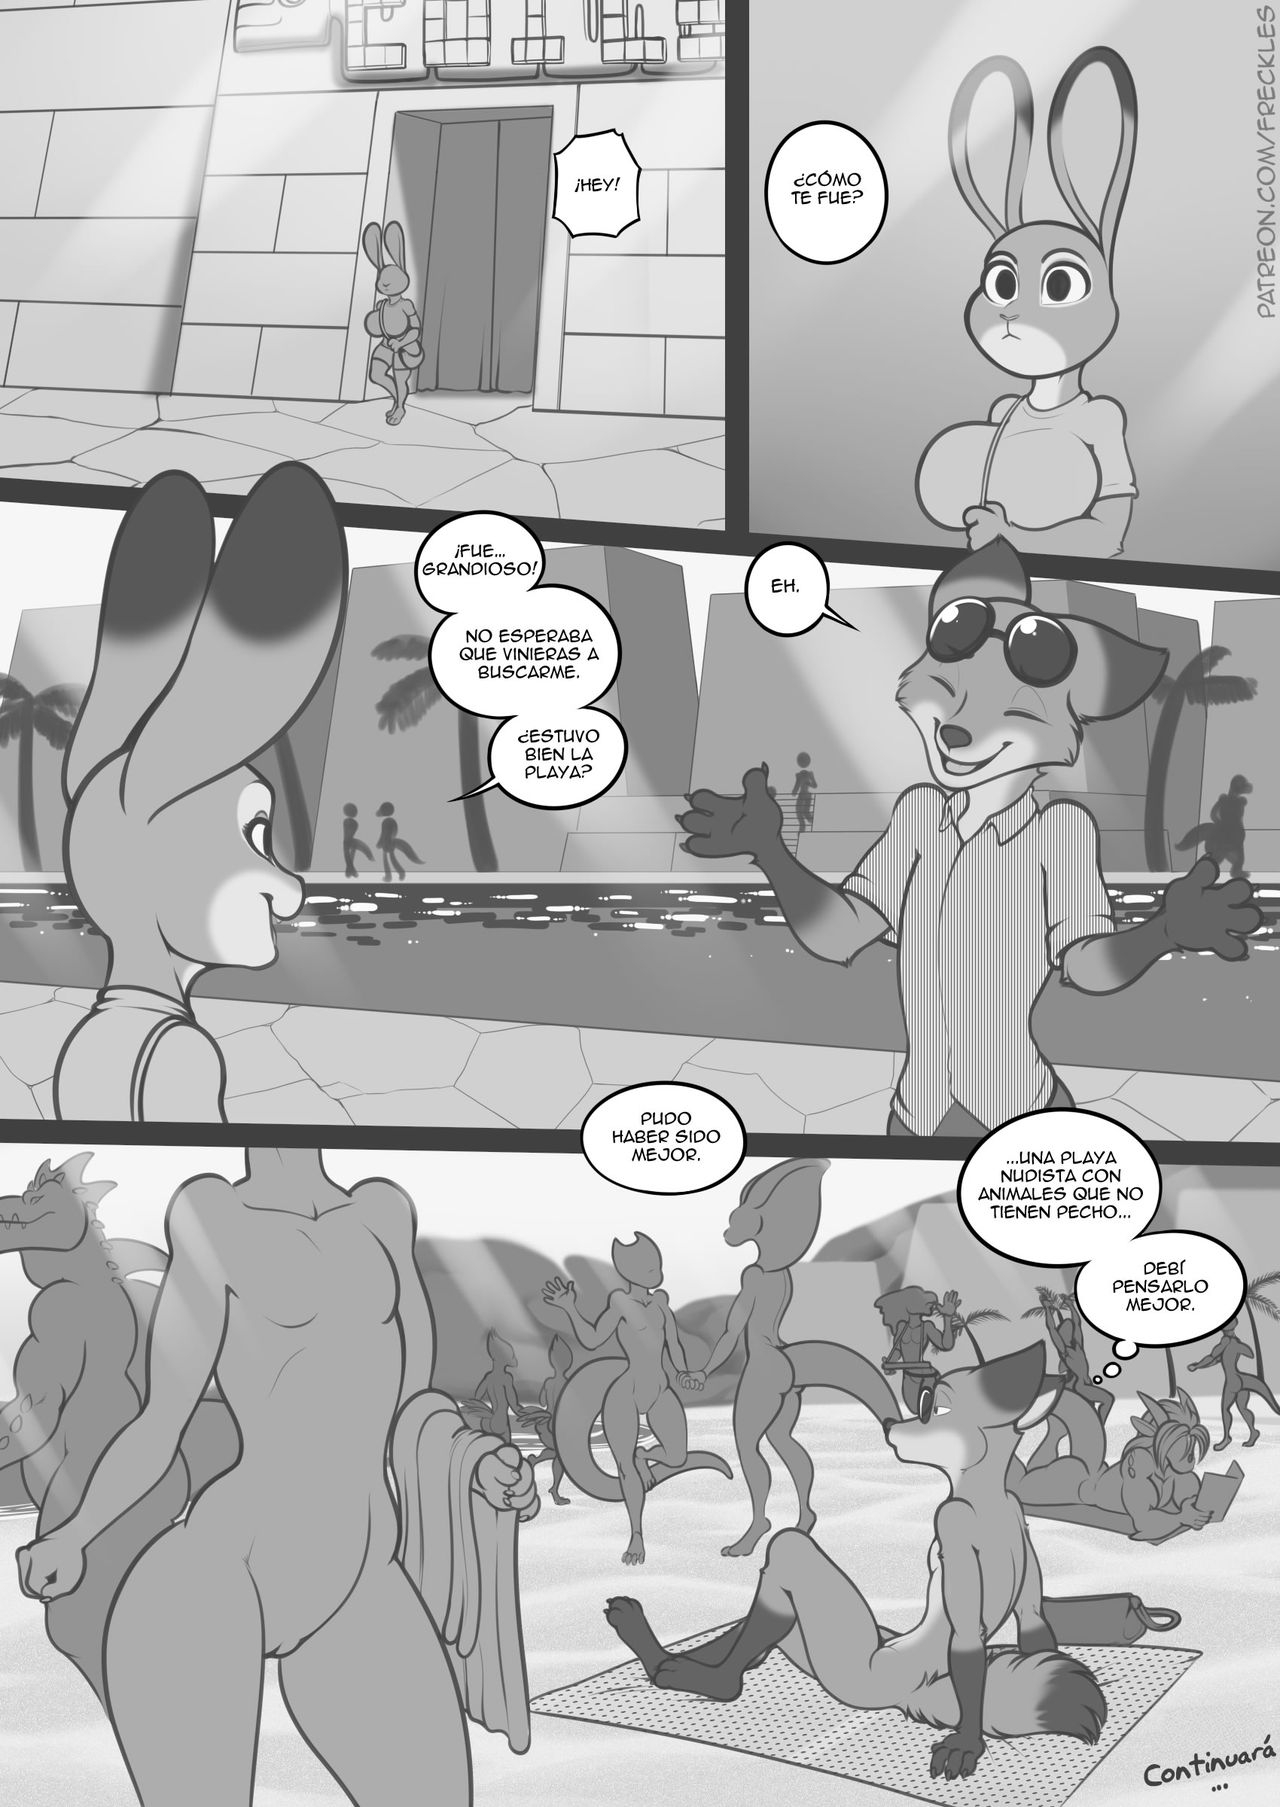 [Freckles] Busted 3 / Reventar 3 (Zootopia) [Red Fox Makkan] 18